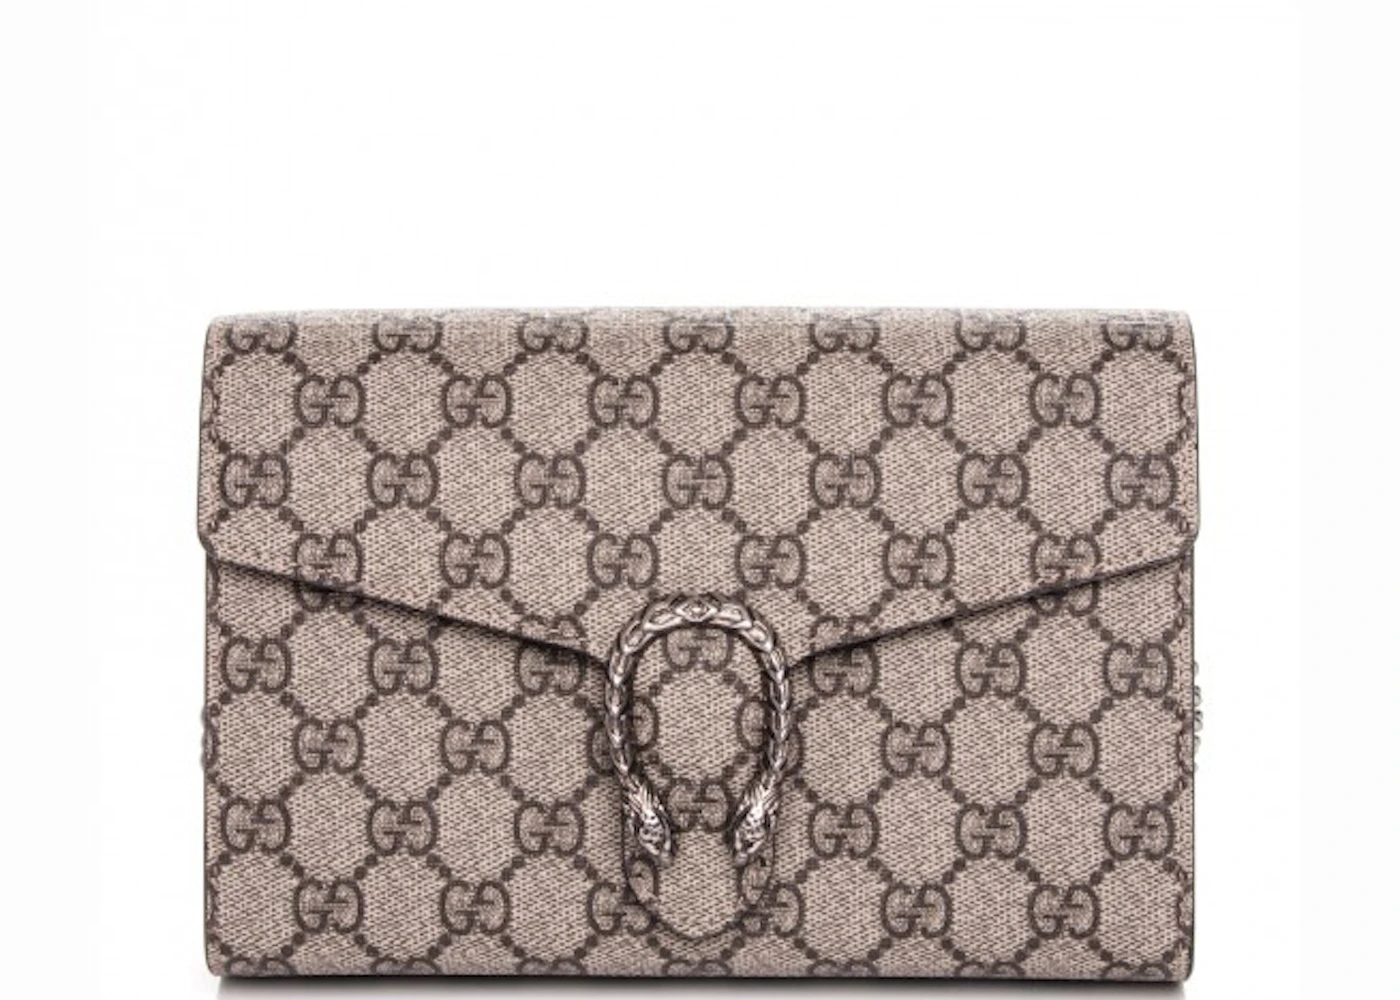 Brandname.therapy - Review Gucci Dionysus wallet on chain